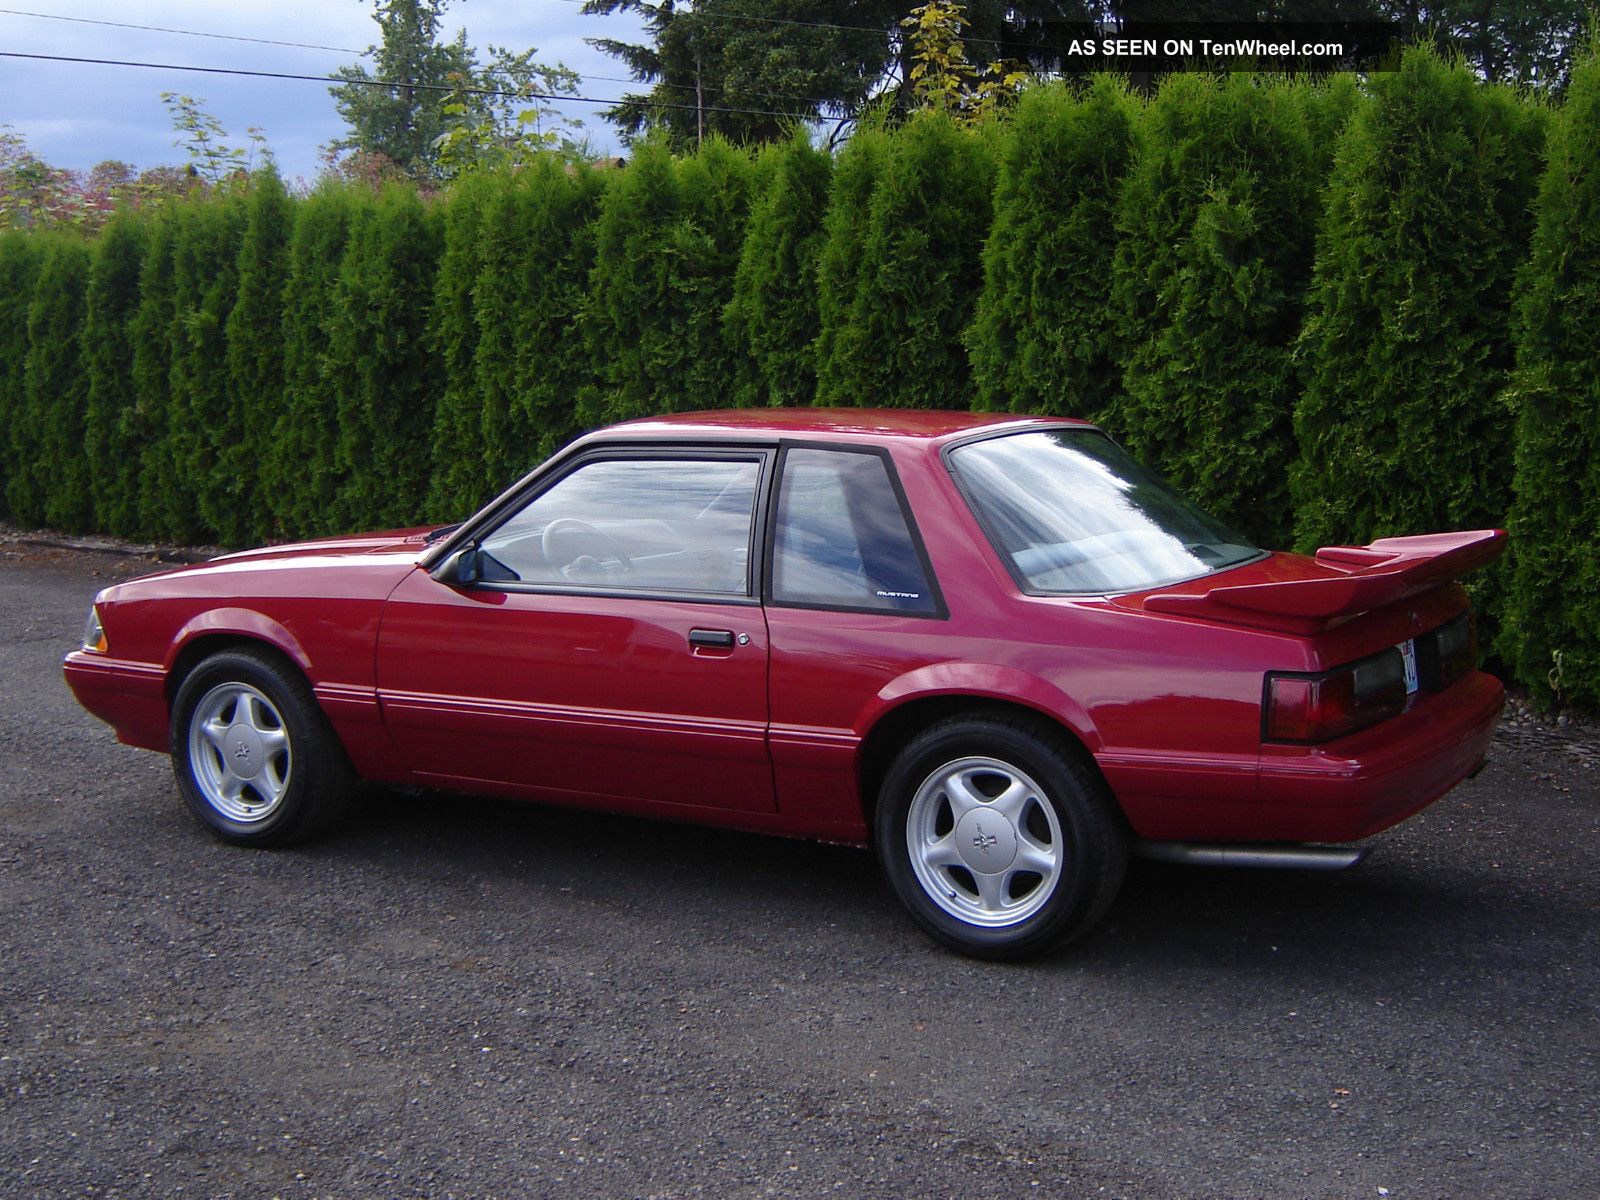 1989 Mustang Coupe